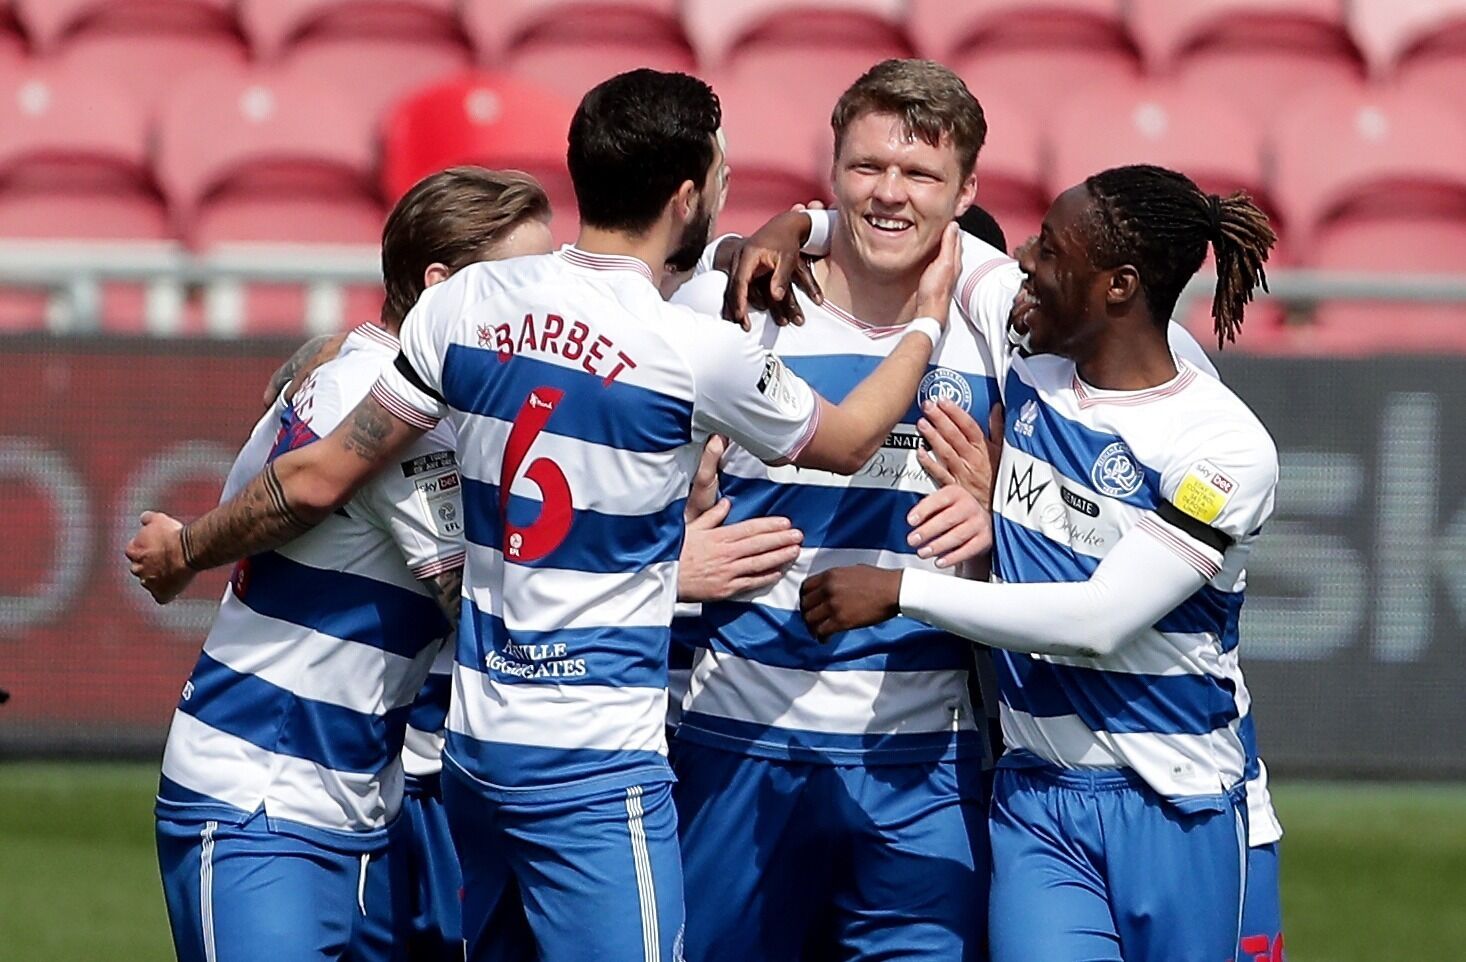 QPR 3-2 Cardiff City: Dominic Ball scores stunning stoppage-time